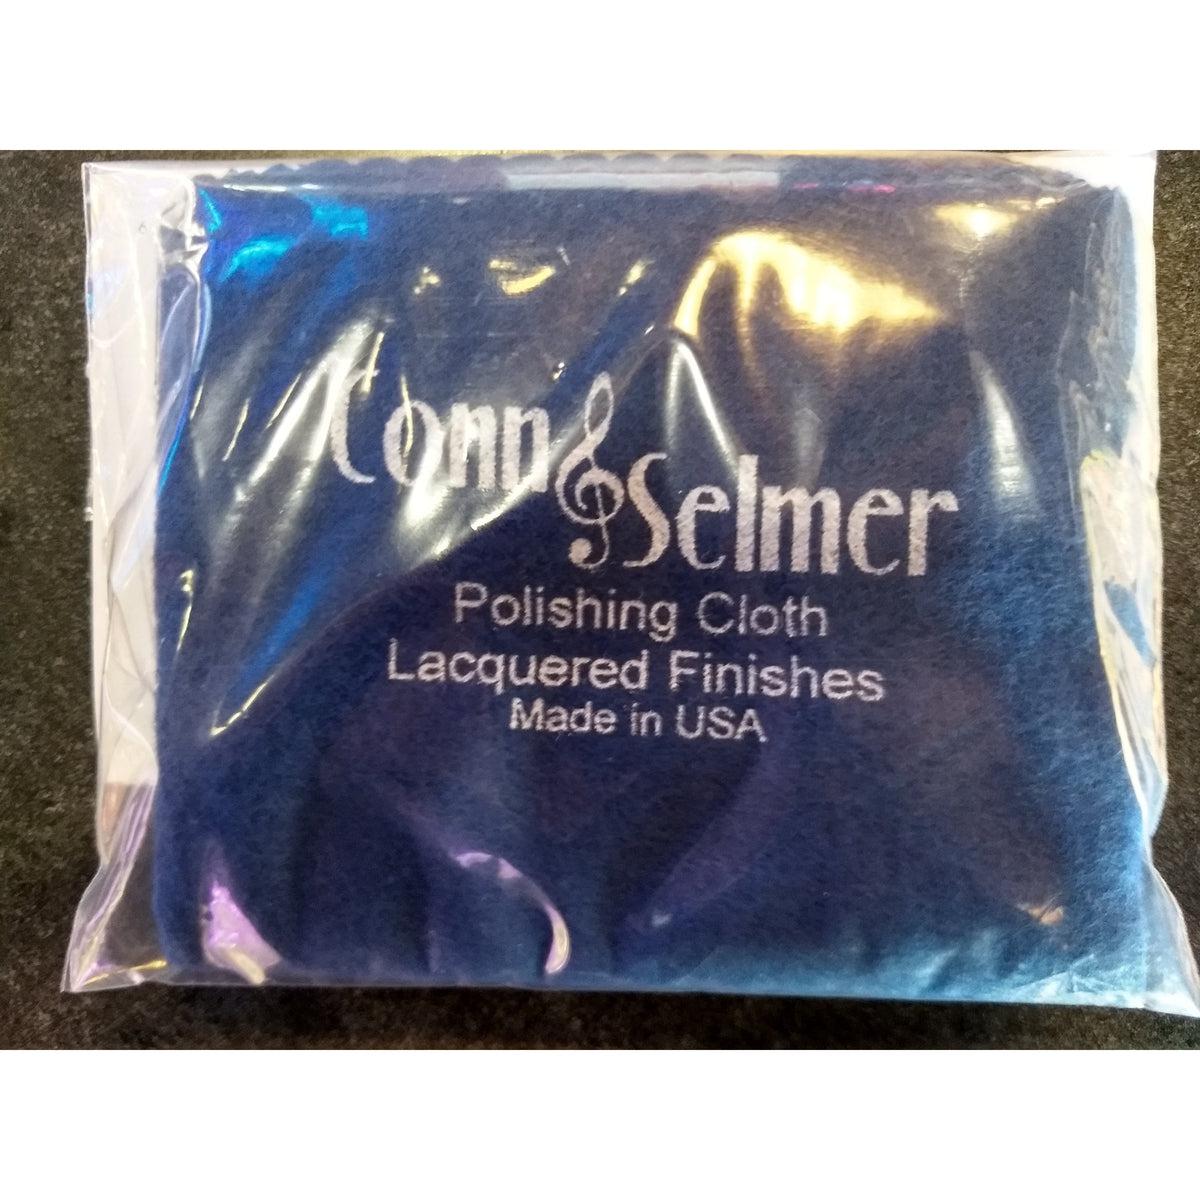 Selmer 2952 Polishing Cloth For Lacquered Finishes